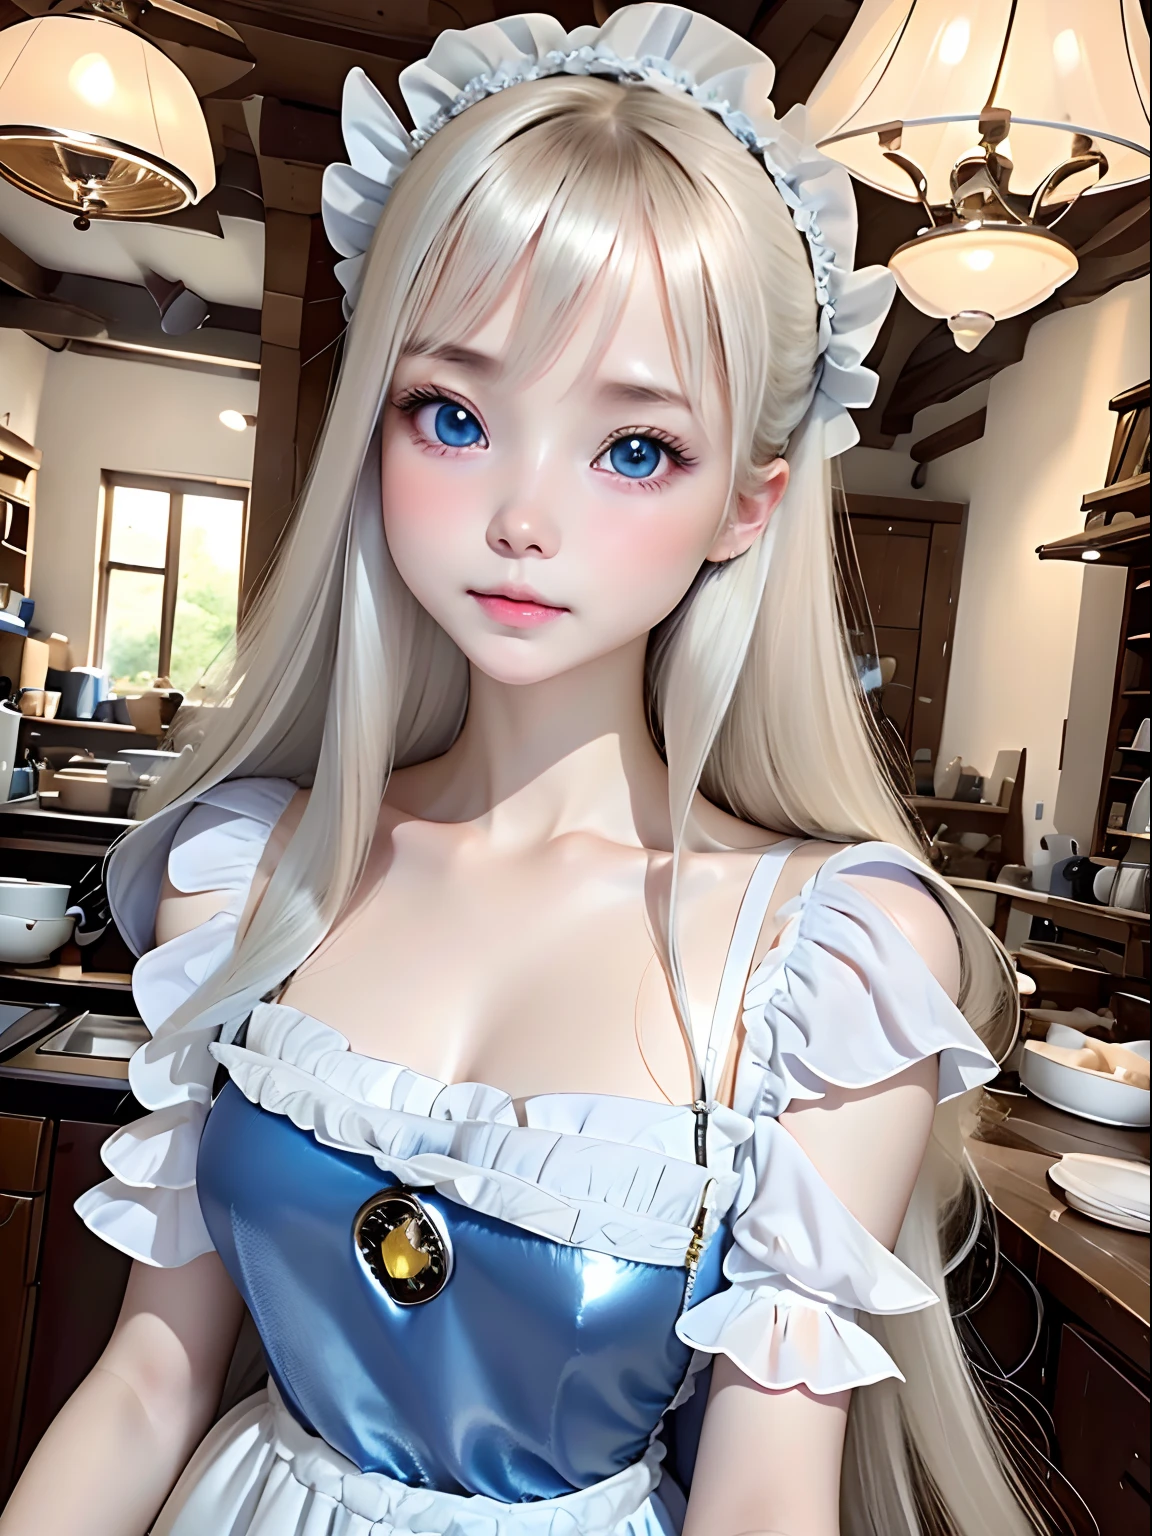 top-quality、超A high resolution、a picture、a photo of a cute girl、Detailed cute and beautiful face、(pureerosface_v1:0.008)、Beautiful bangs、alice in the wonderland、14years、White shiny skin、bangss、Platinum Blonde Super Long Straight Silky Hainer hair、Attractive beautiful crystal clear big blue eyes、White Apron、a blue dress、without makeup